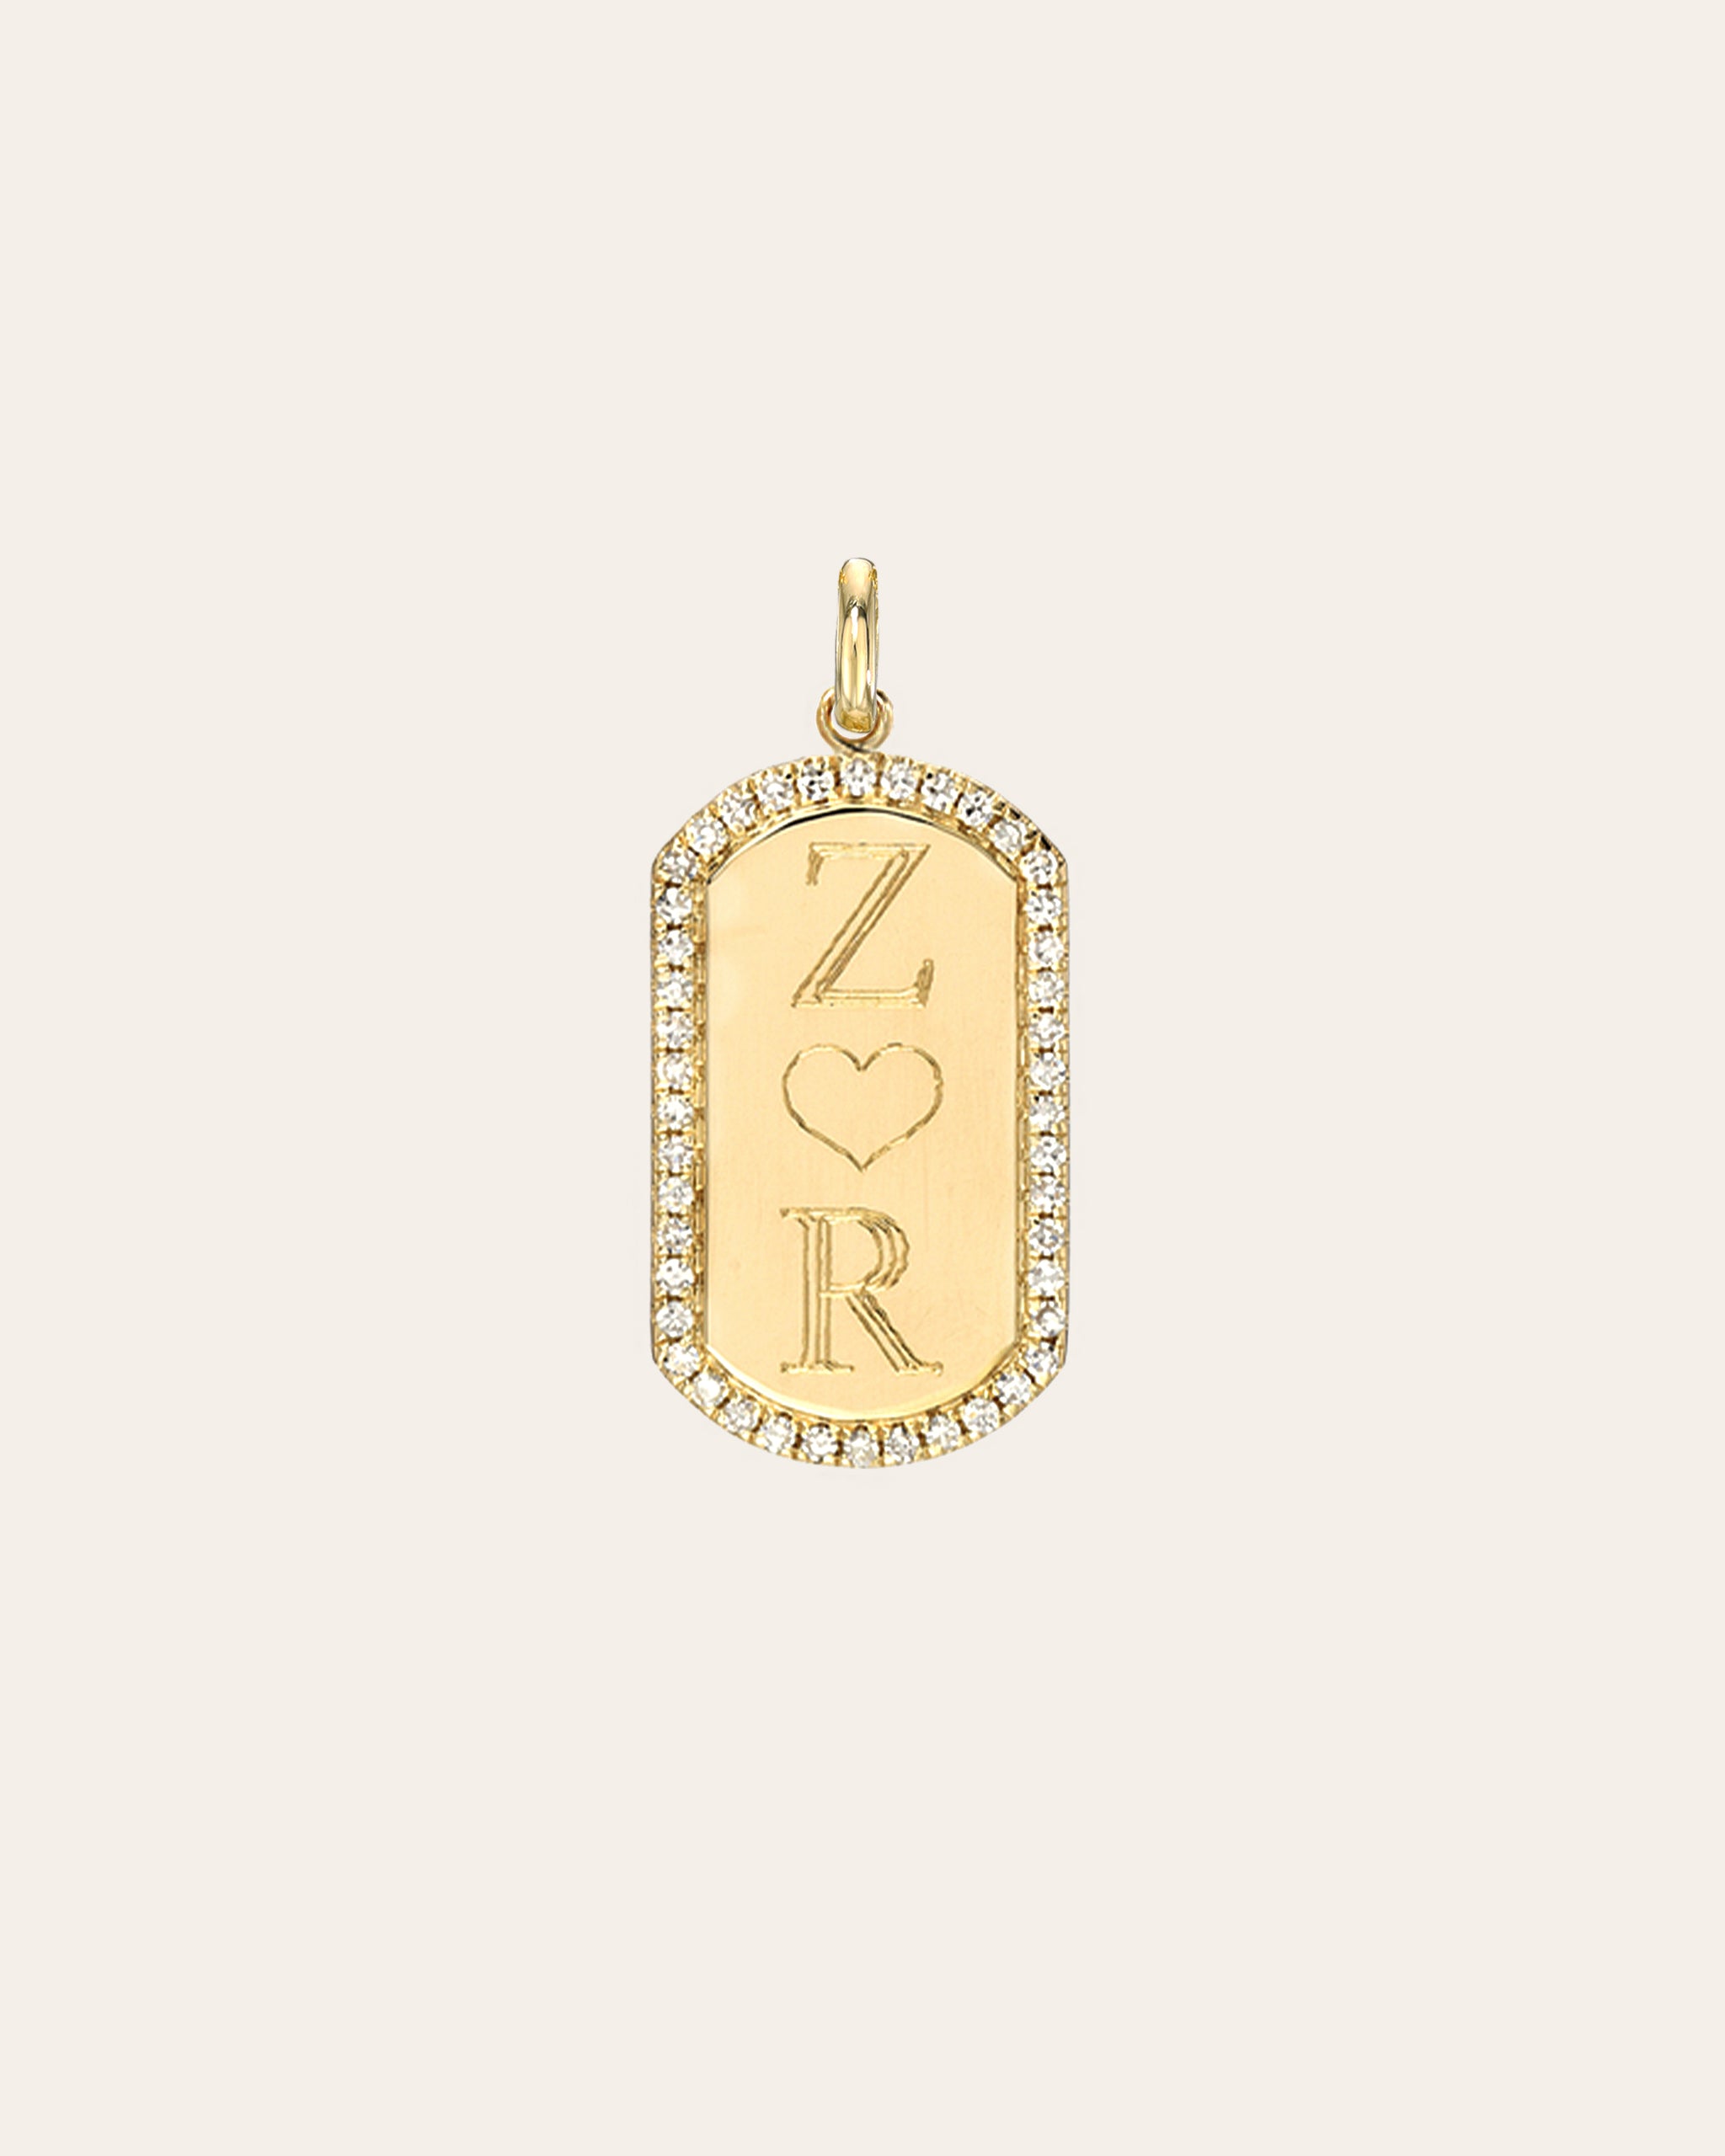 Tiny Name Tag Charm, Personalized Birthstone Necklace, Gold Name Tag  Pendant, Monogram Initial, Custom Engraved, Mini Name Jewelry